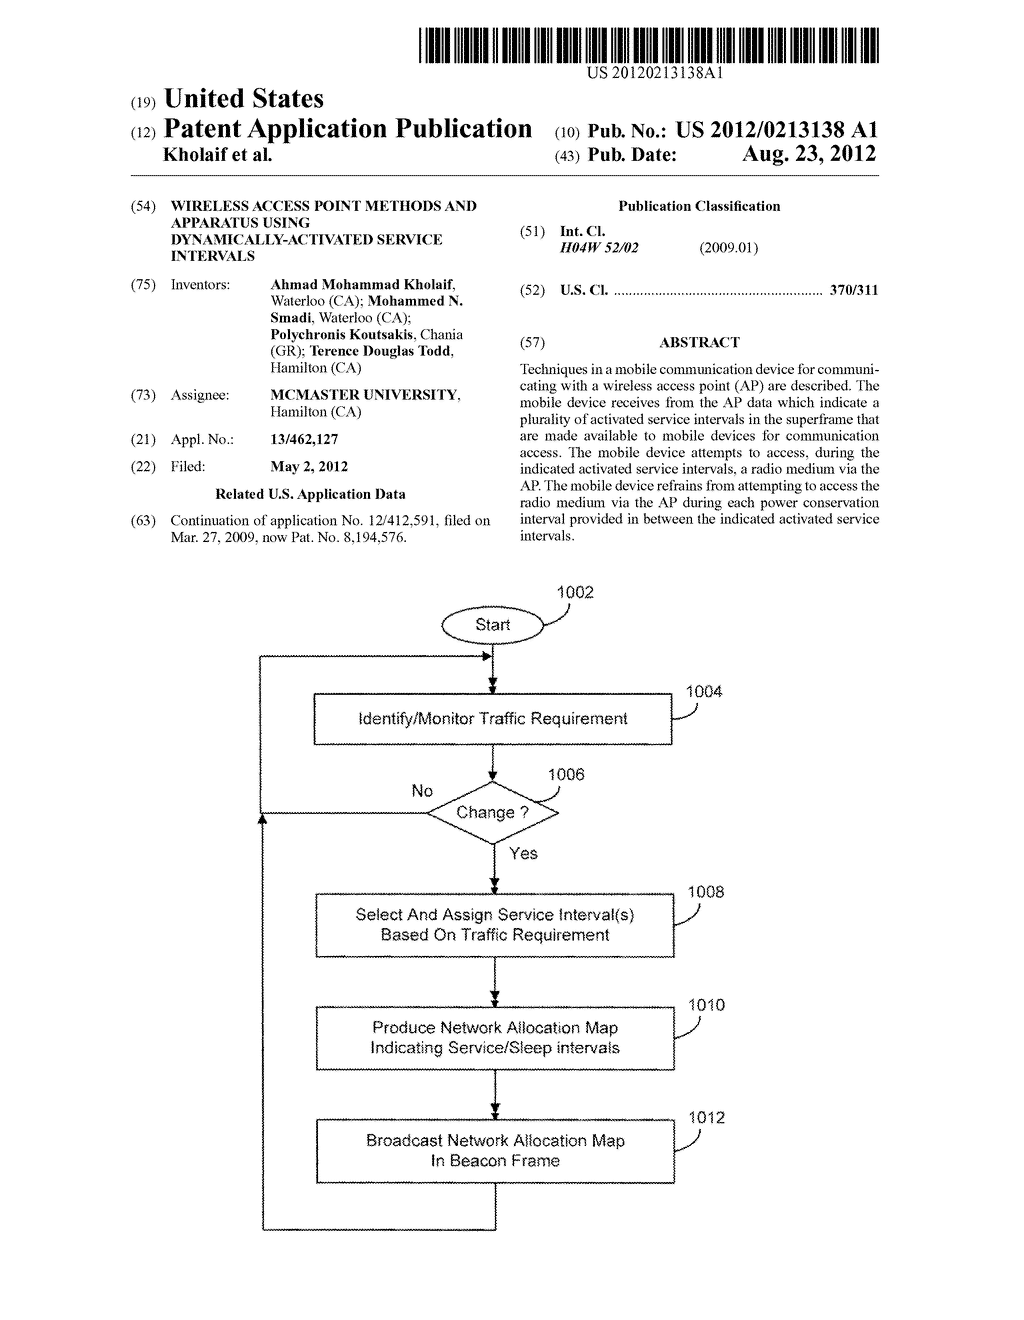 Wireless Access Point Methods And Apparatus Using Dynamically-Activated     Service Intervals - diagram, schematic, and image 01